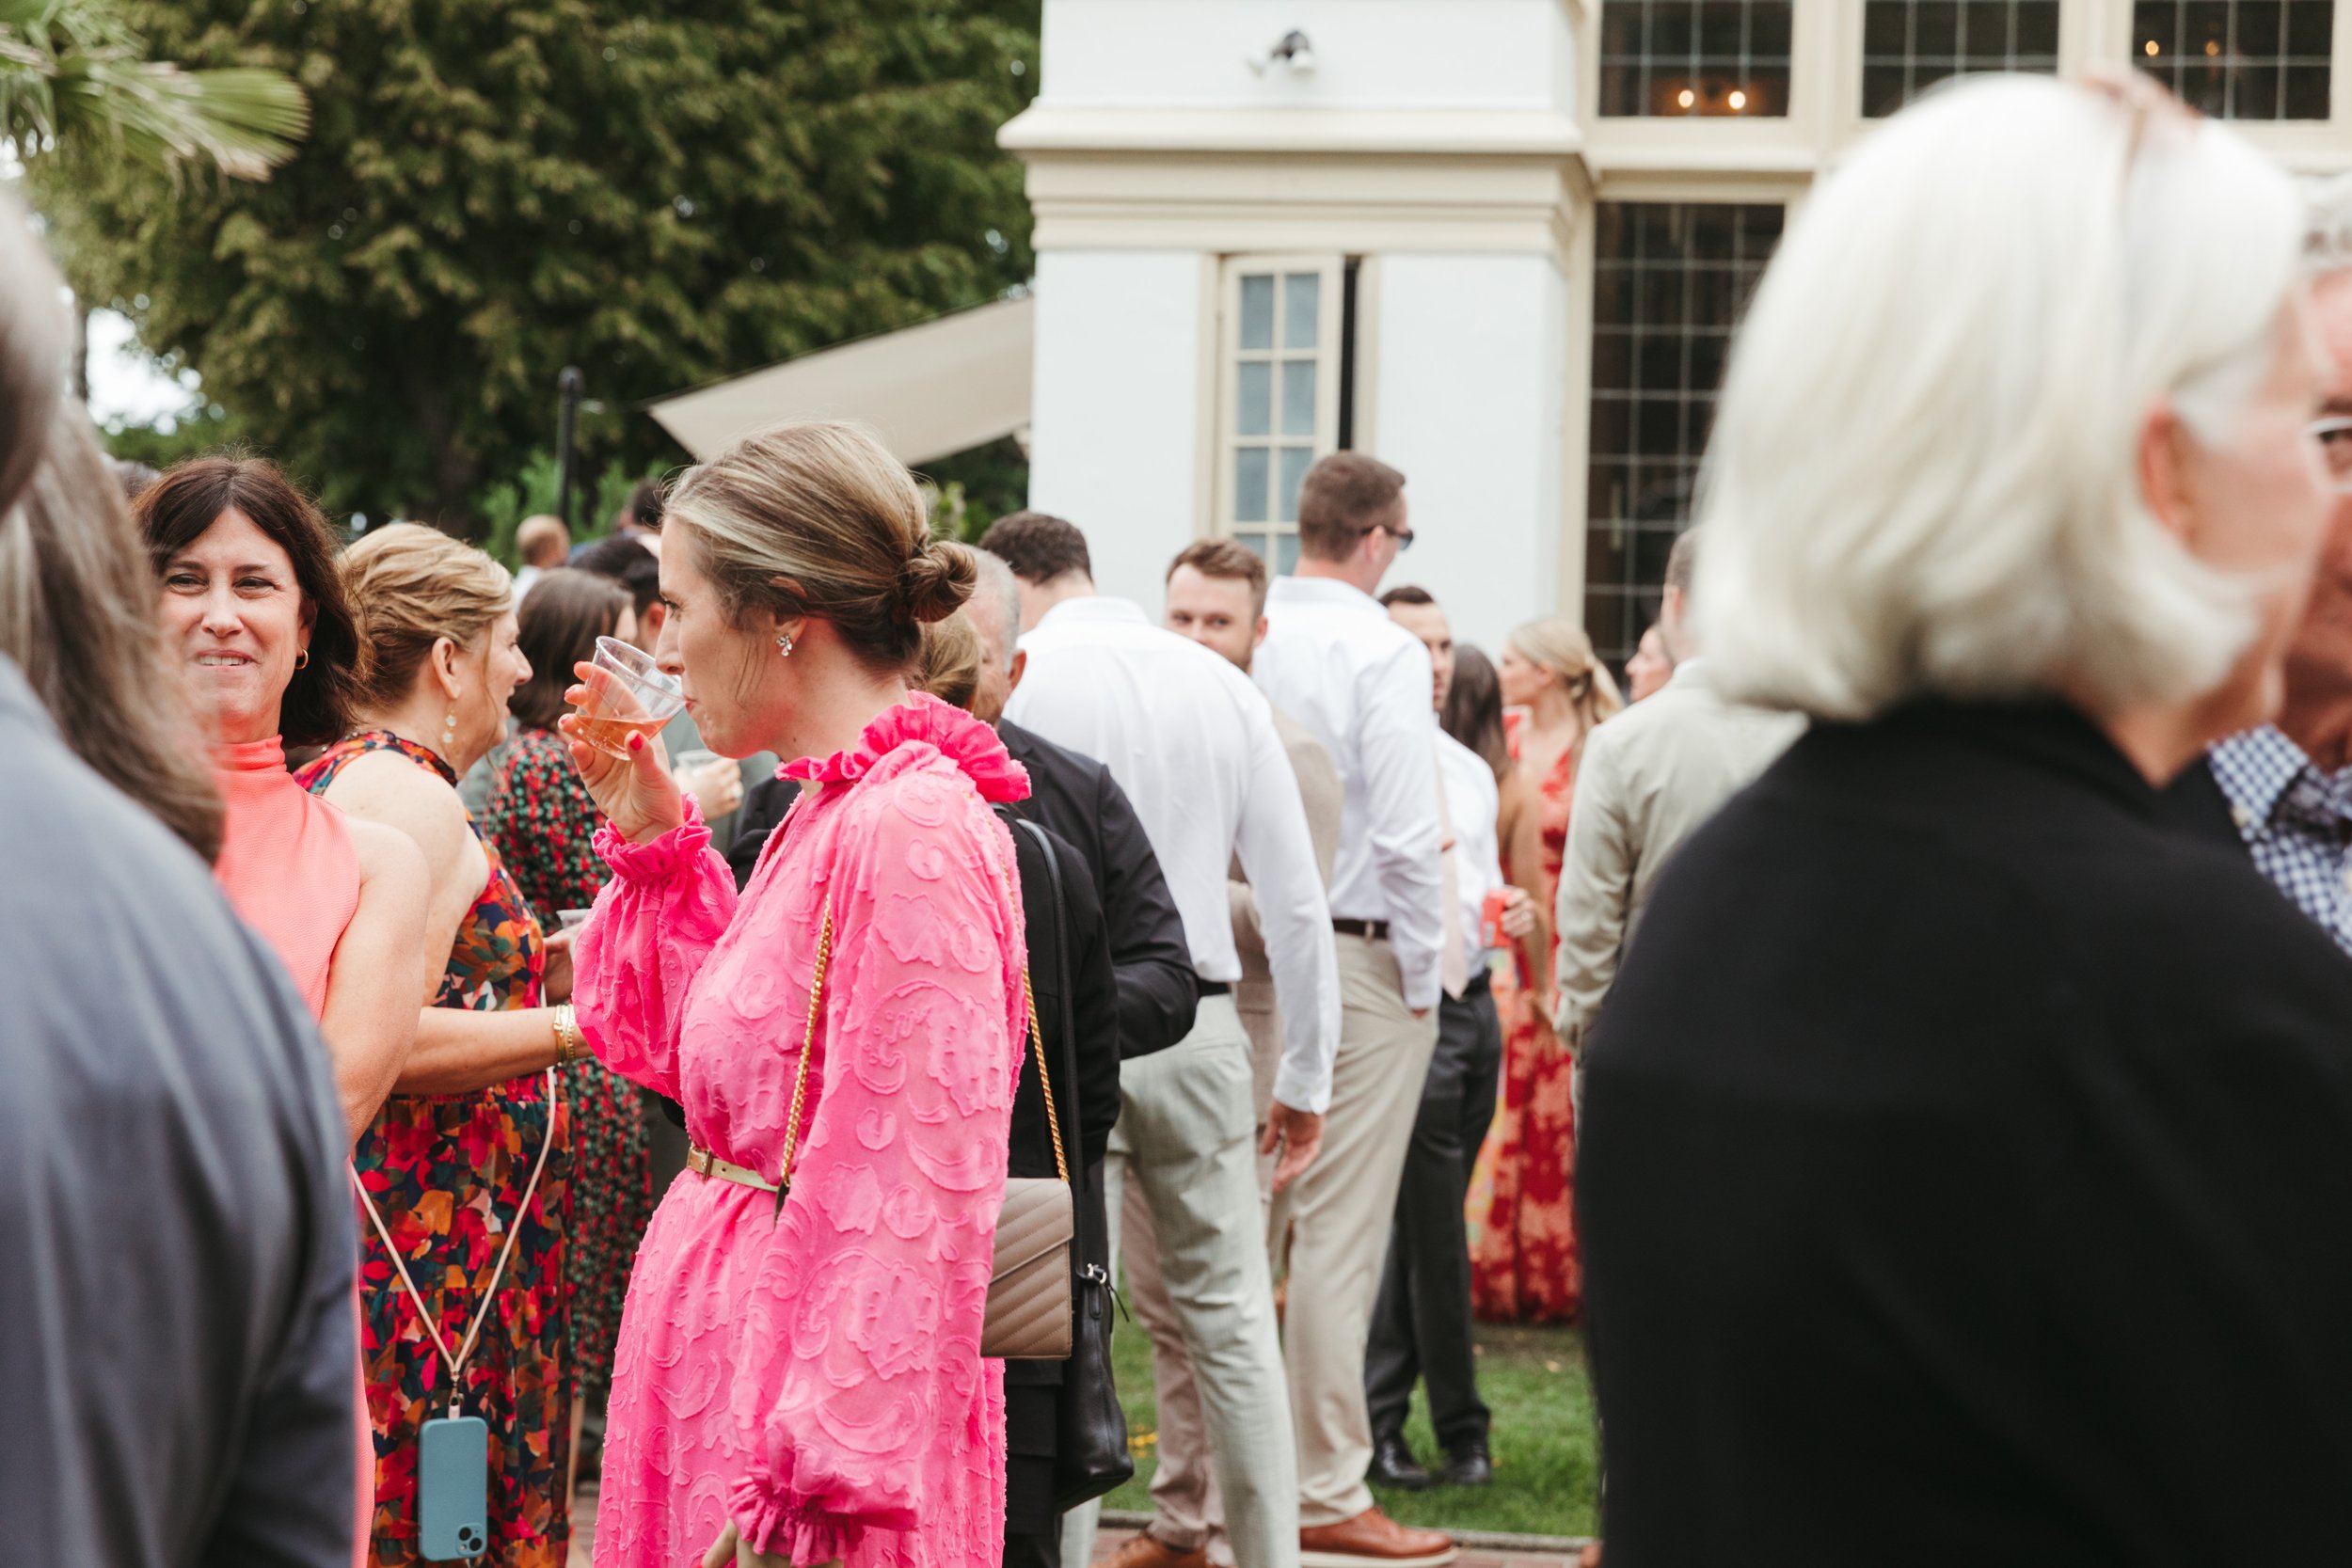  garden reception at the lairmont manor 